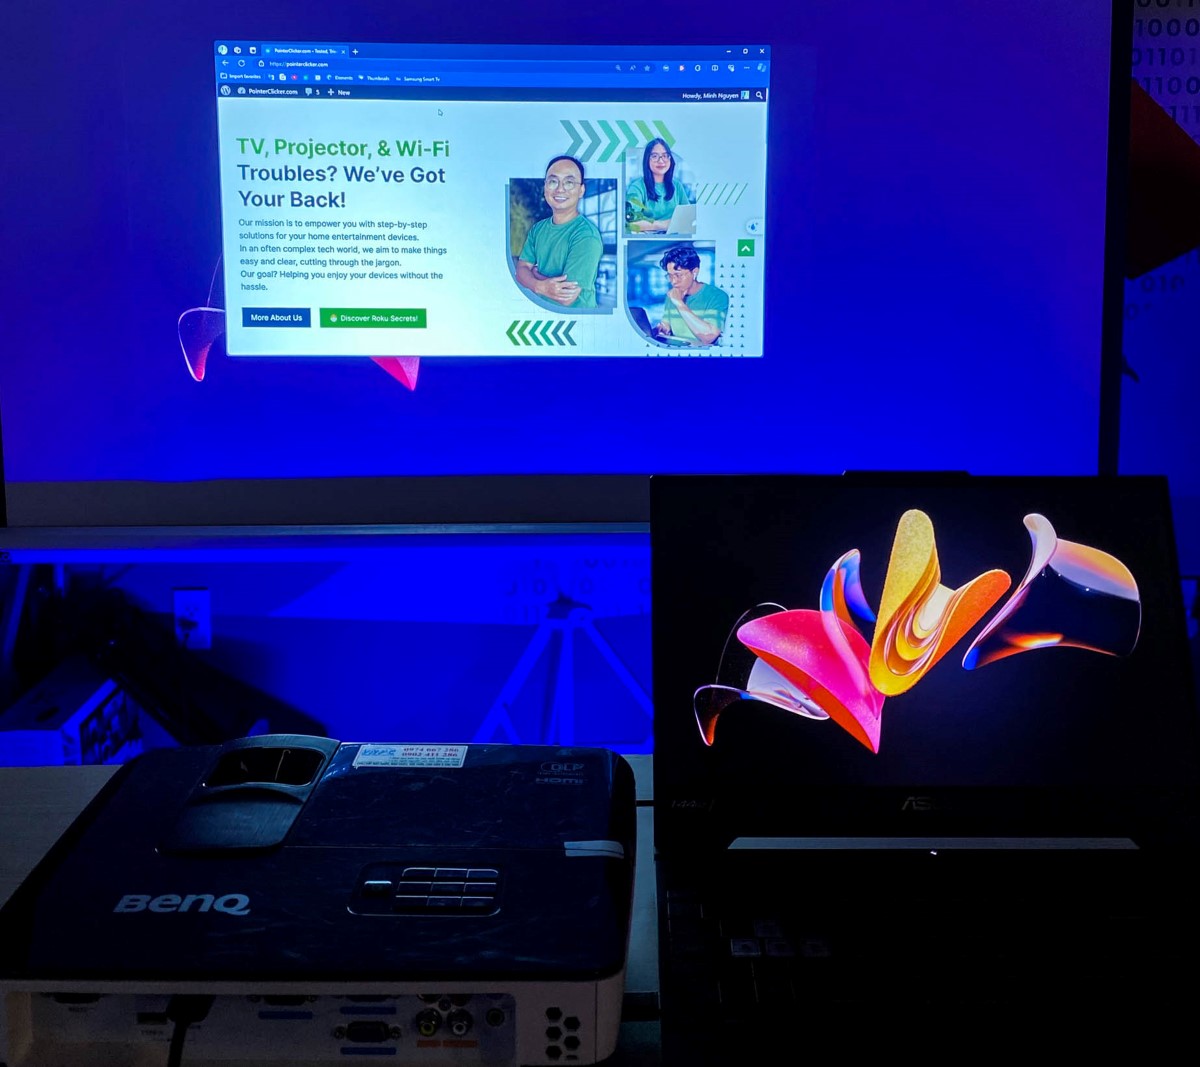 a Benq projector shows a separate screen while connecting to a laptop